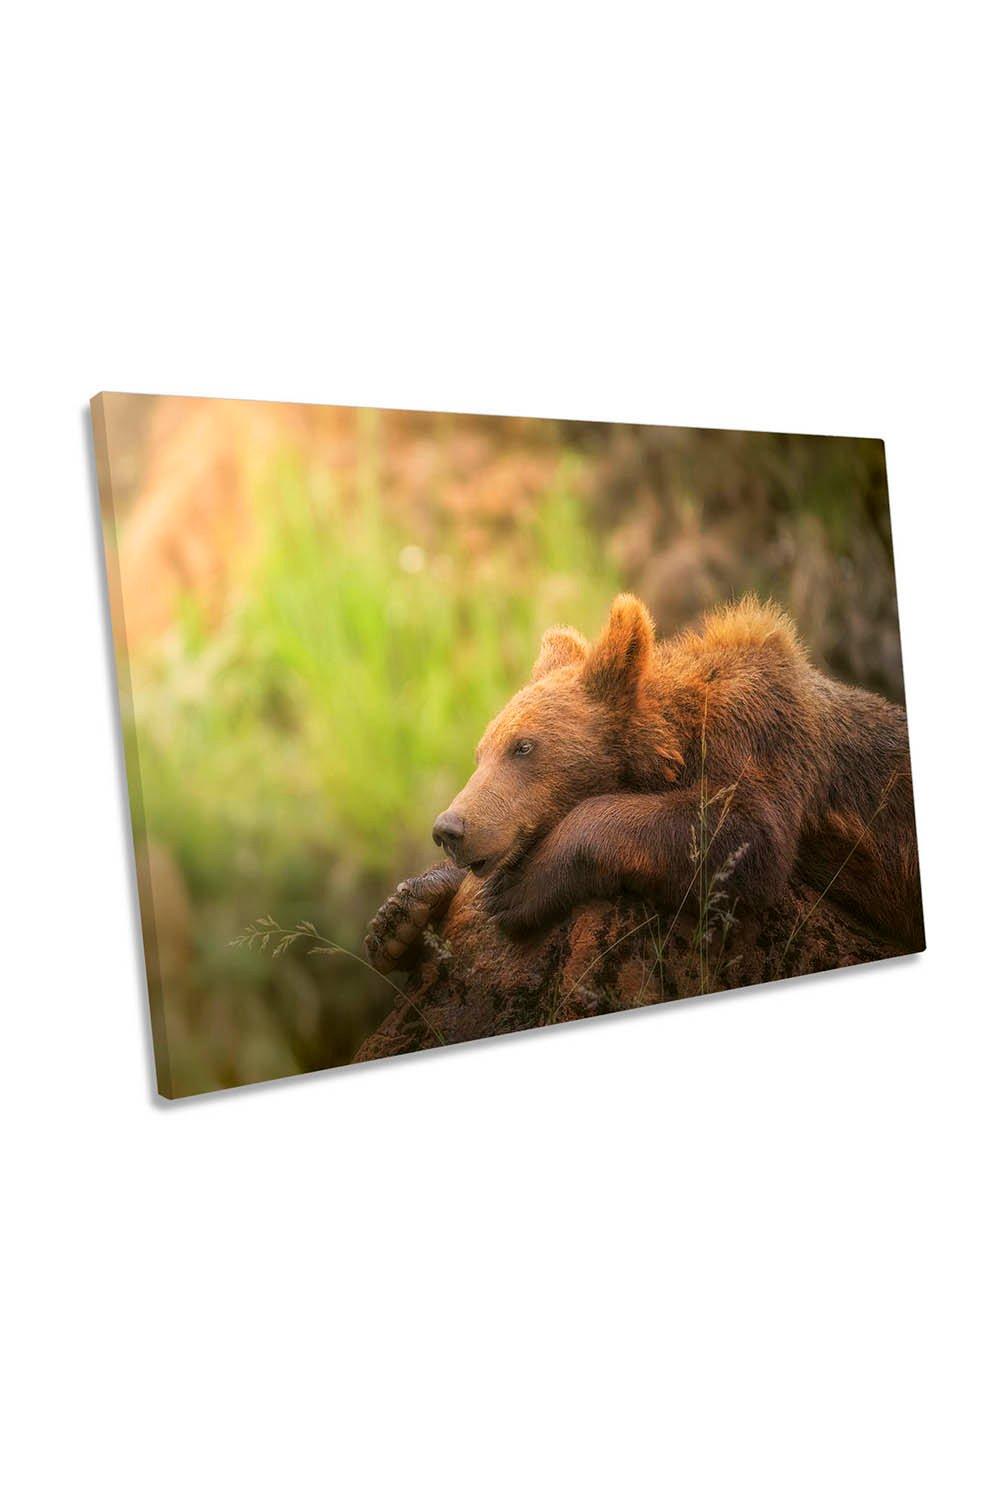 Top Model Young Brown Bear Canvas Wall Art Picture Print